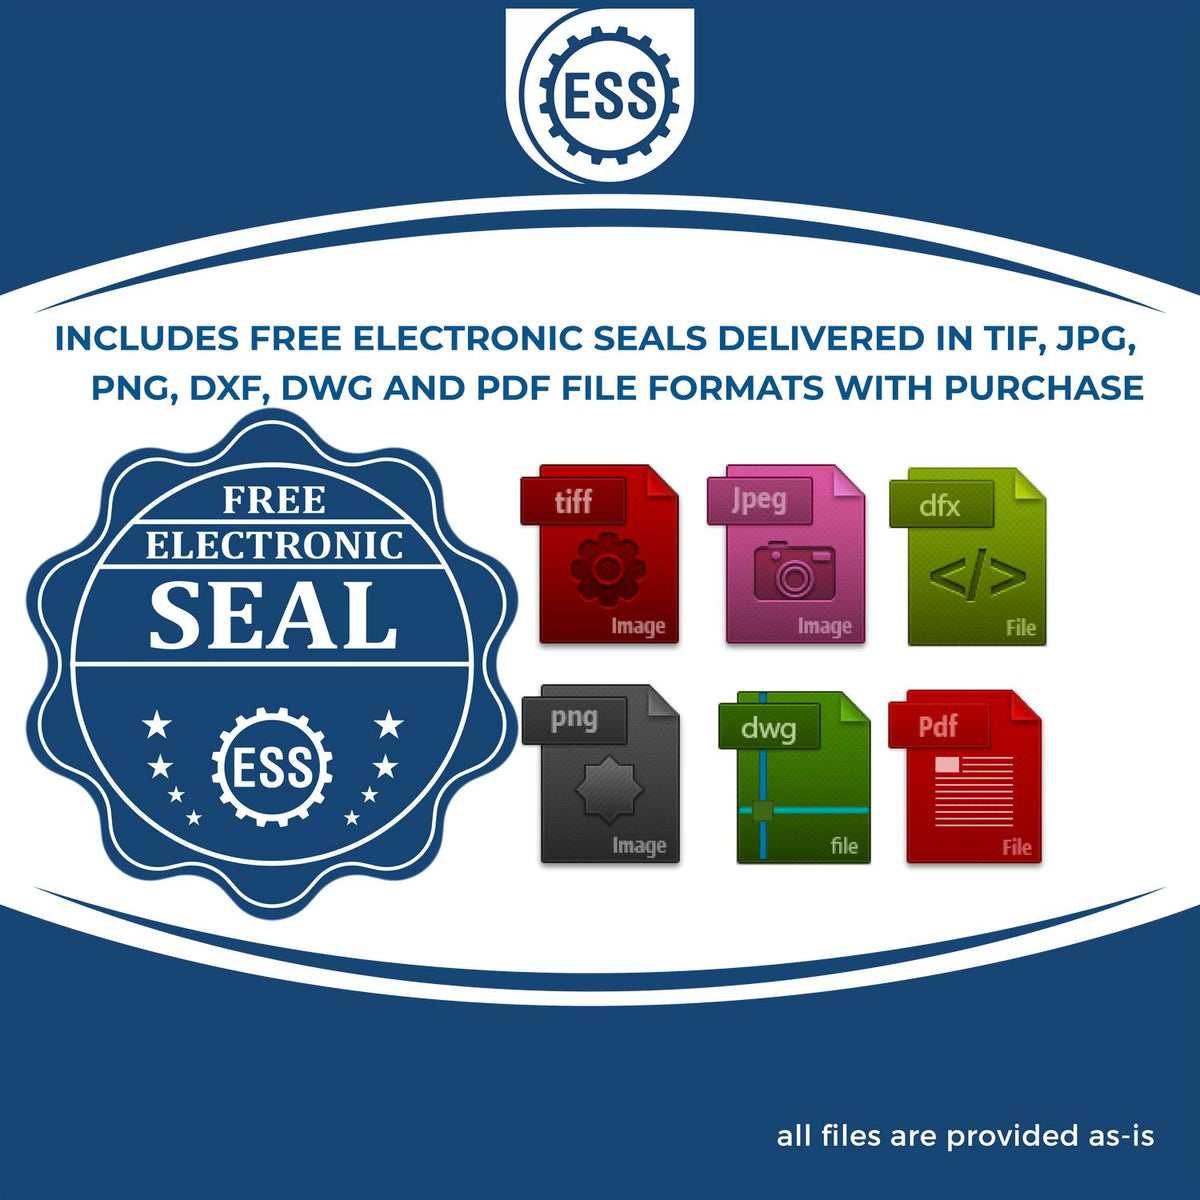 An infographic for the free electronic seal for the Self-Inking State Seal West Virginia Notary Stamp illustrating the different file type icons such as DXF, DWG, TIF, JPG and PNG.